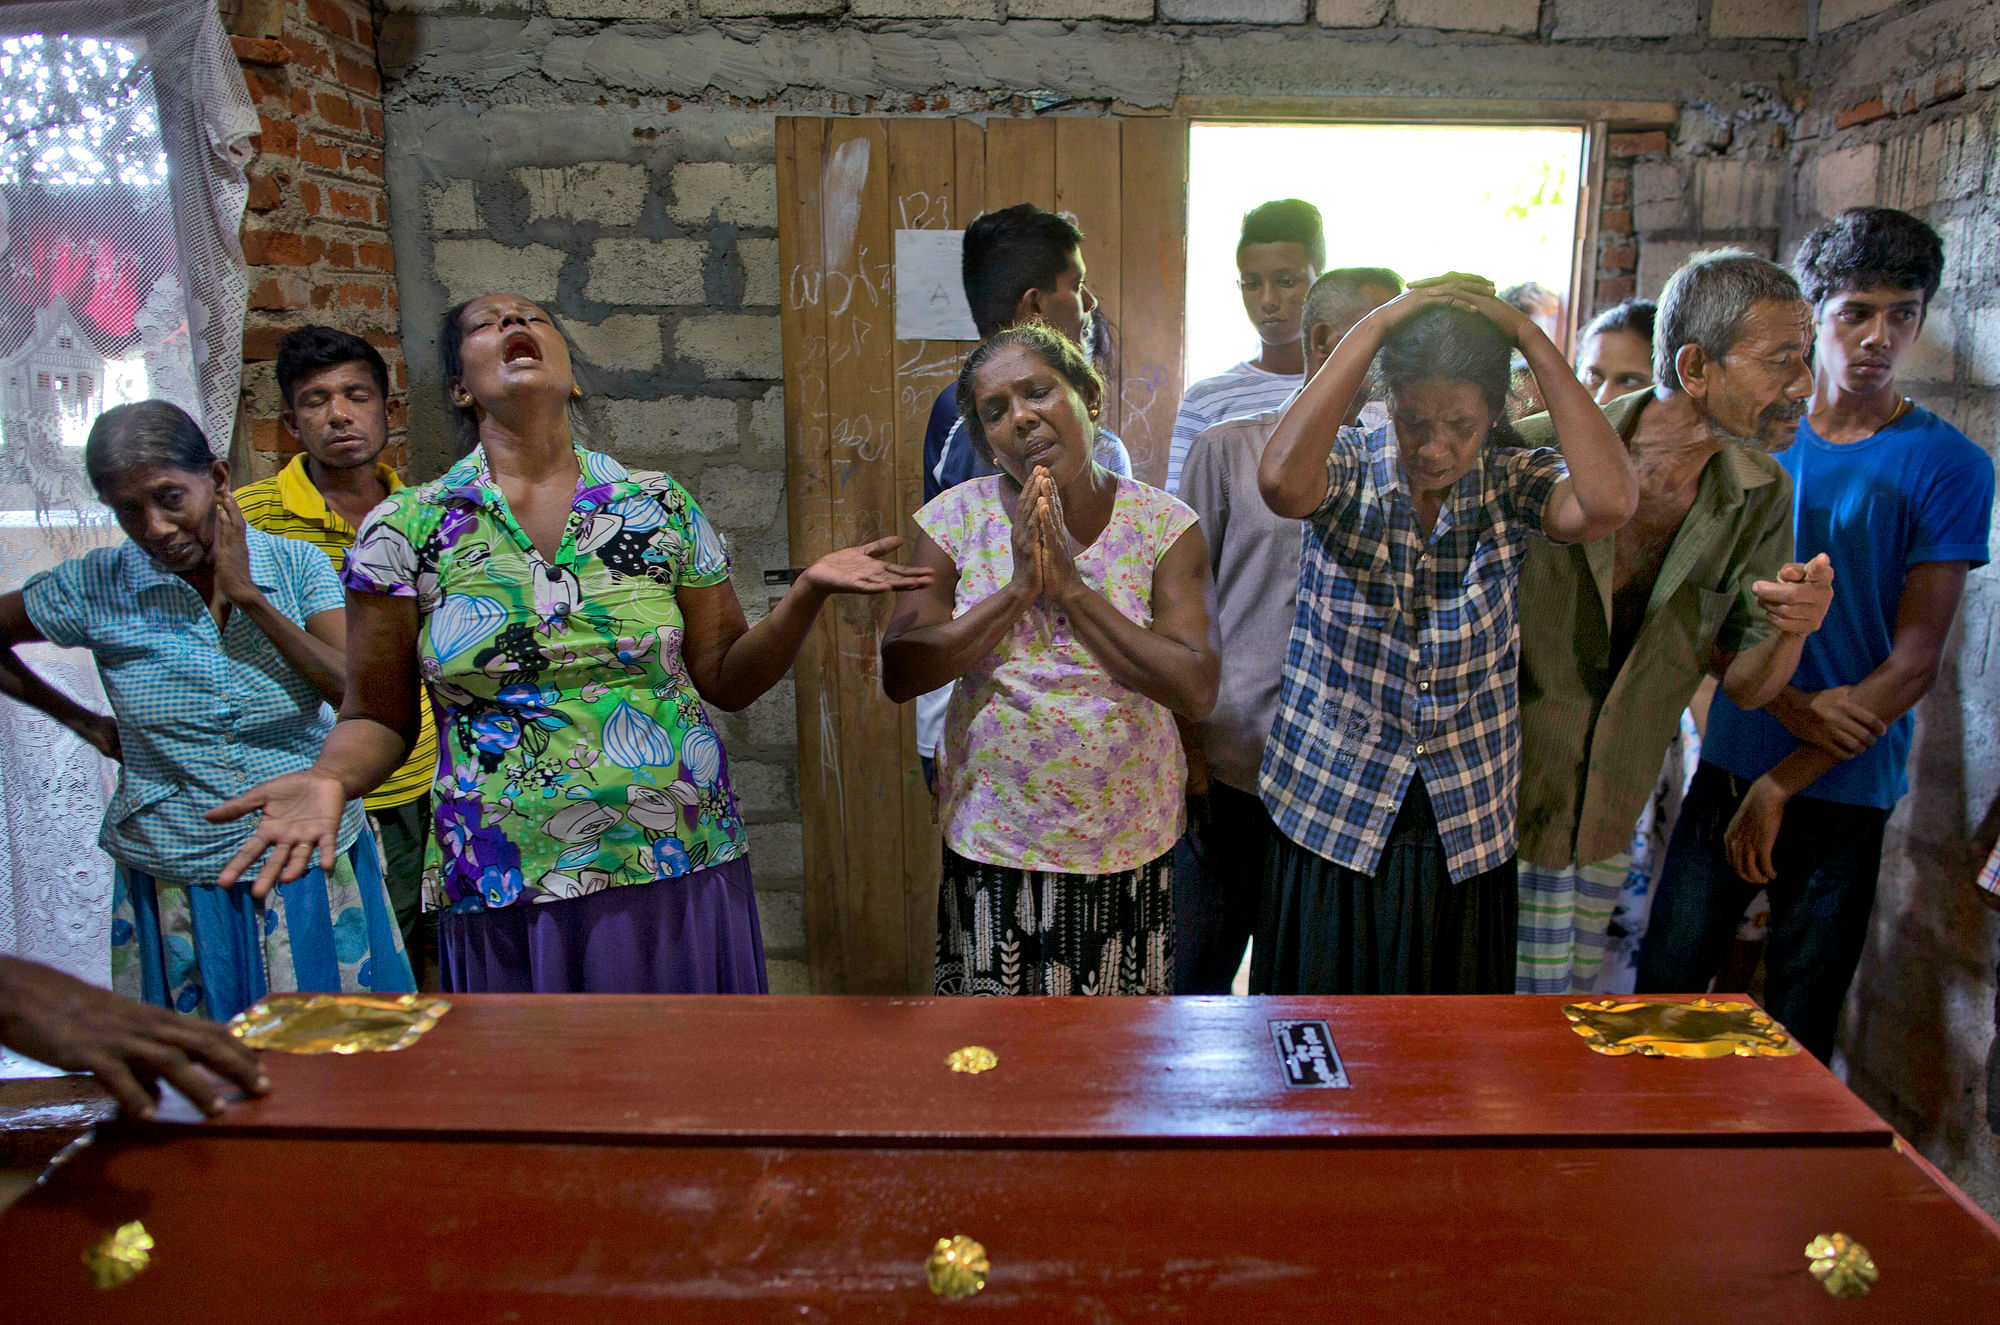 Relatives weep near the coffin carrying the remains of 12-year-old Sneha Savindi, who was a victim of the Easter Sunday bombing at St Sebastian Church in Negombo, Sri Lanka.